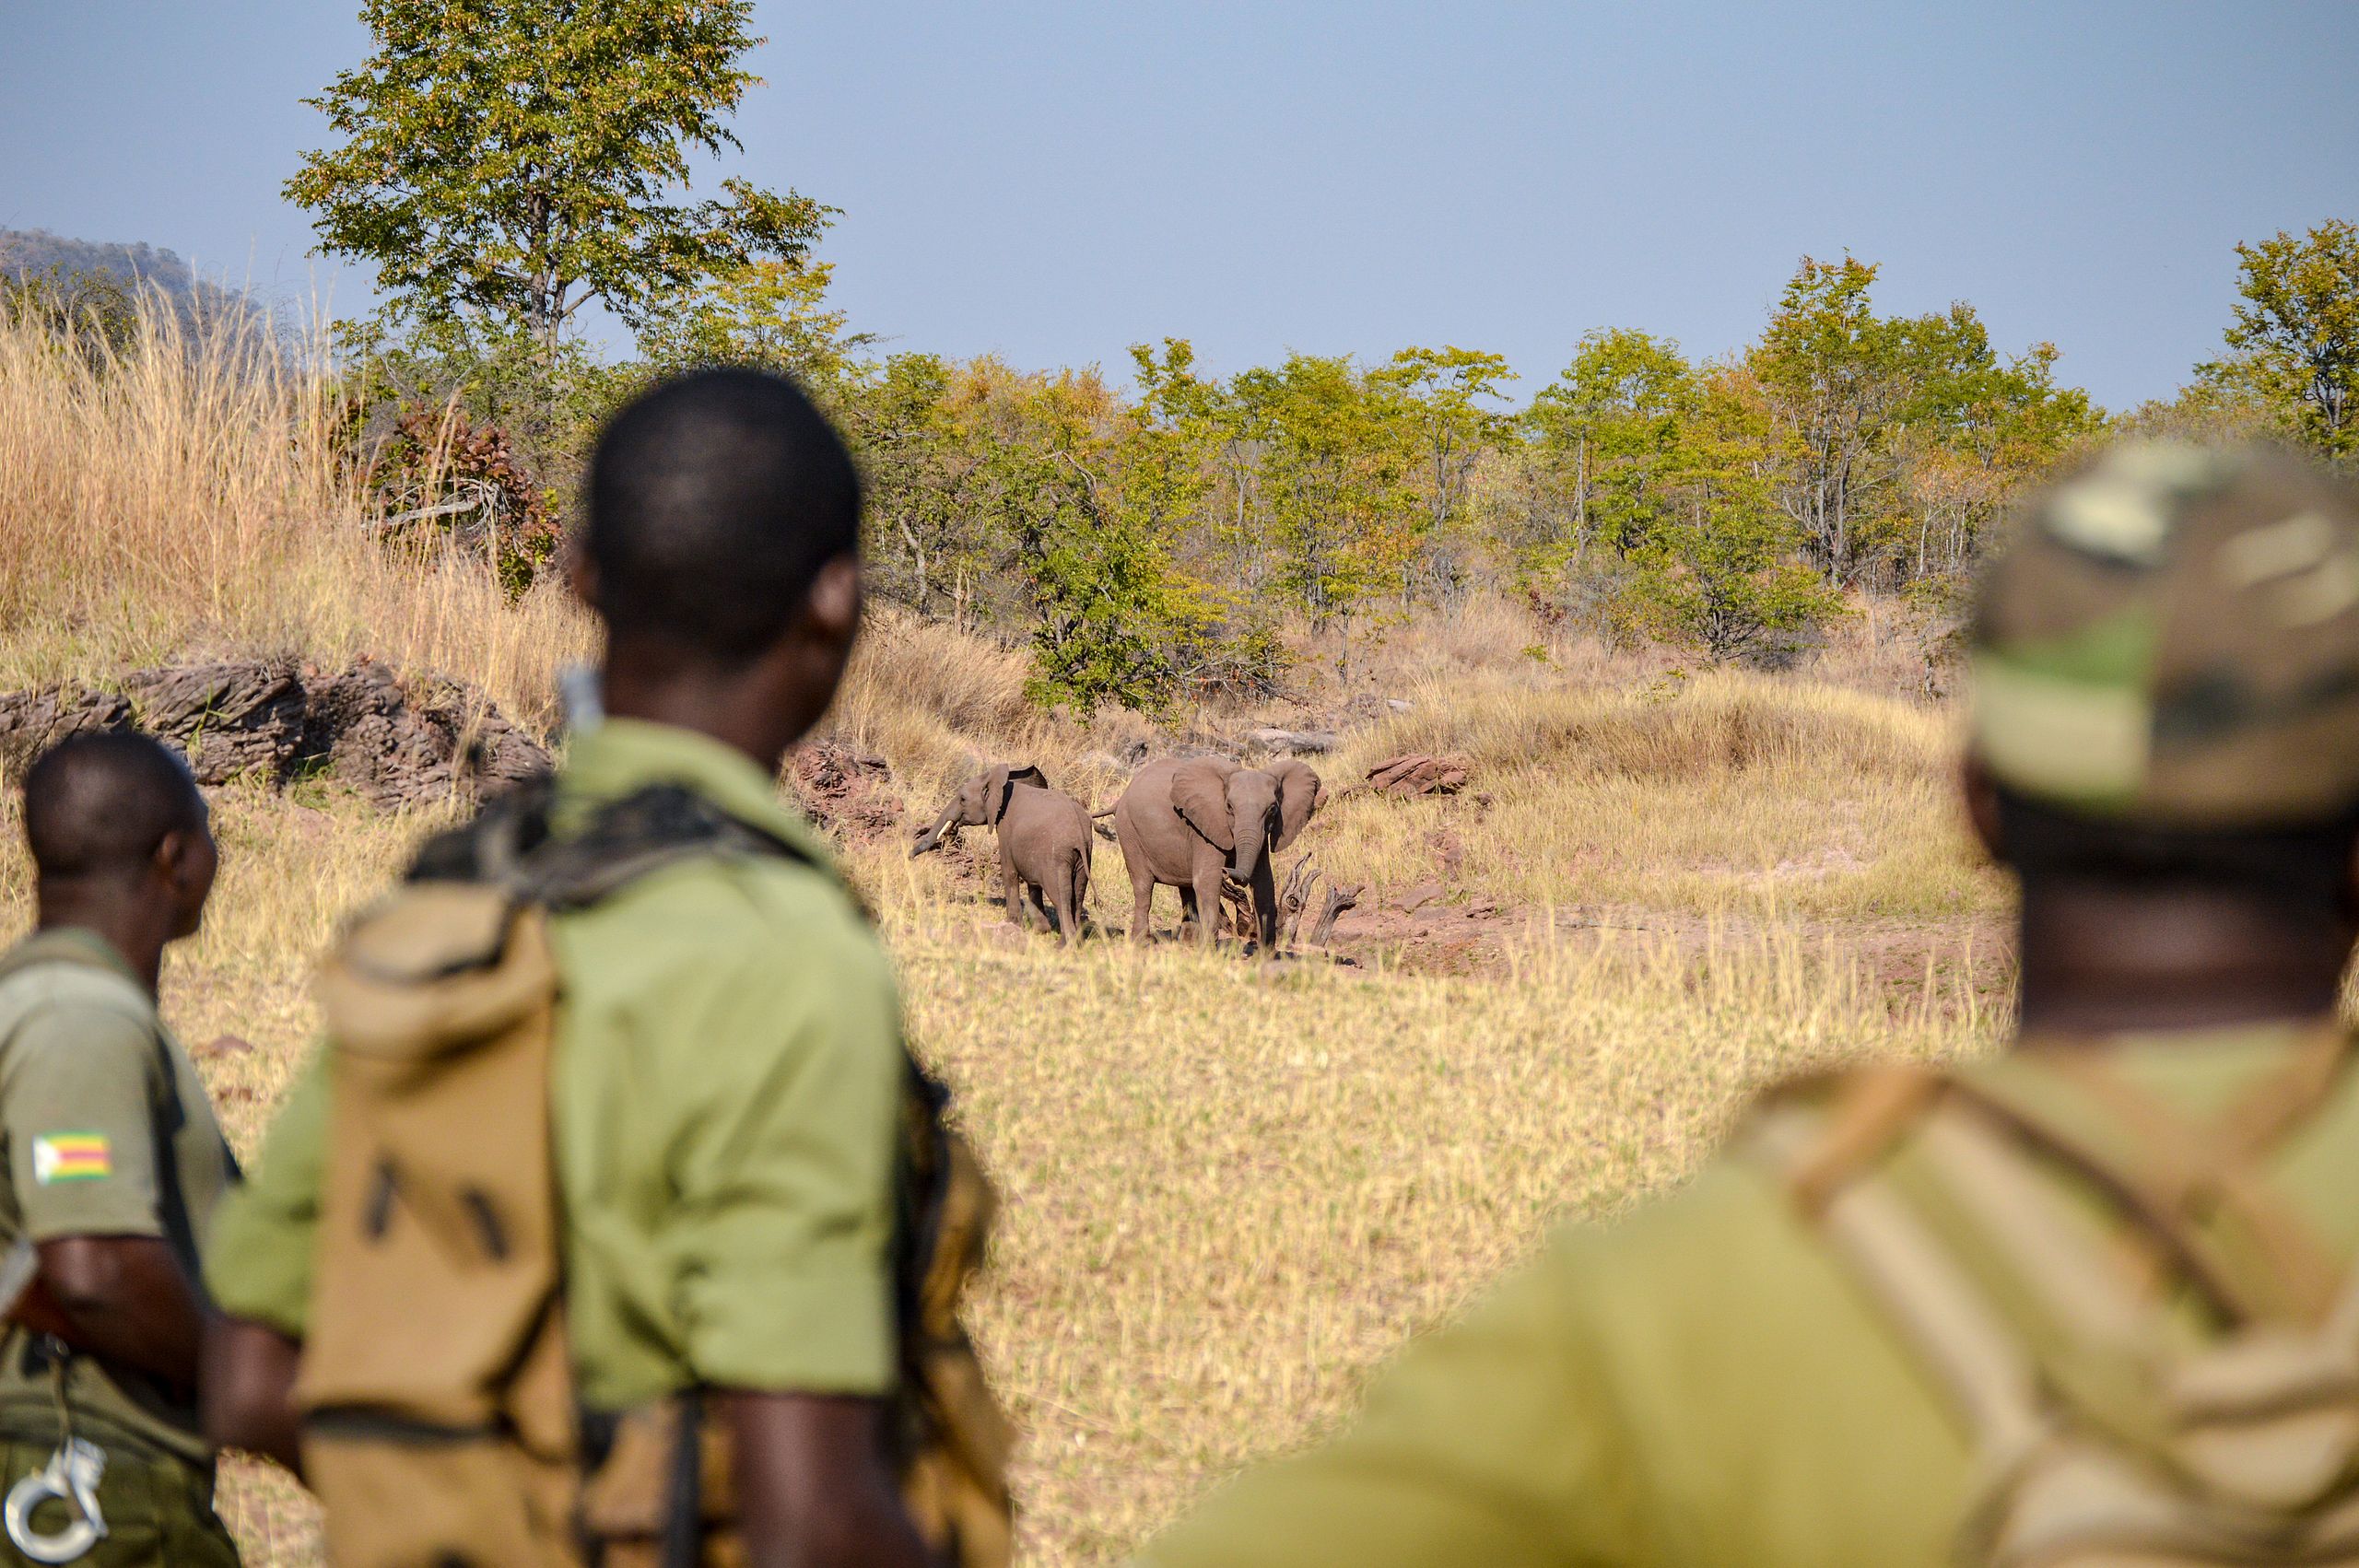 The Bumi Hills Anti-Poaching Unit out on patrol. Image by Bumihillsfoundation via Wikimedia Commons (CC BY-SA 4.0).